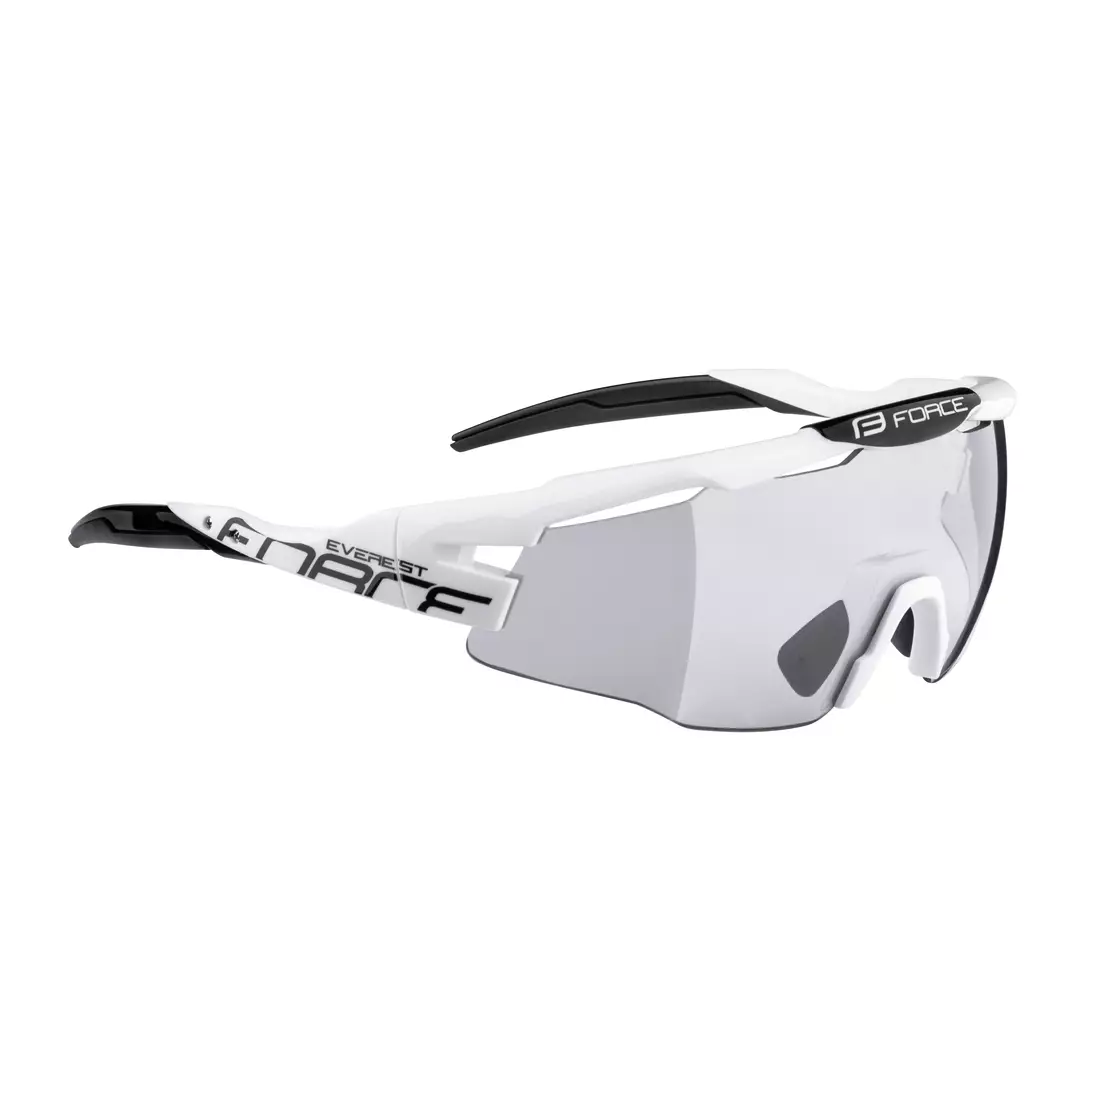 FORCE cycling / sports glasses EVEREST photochromic, black and white, 910915